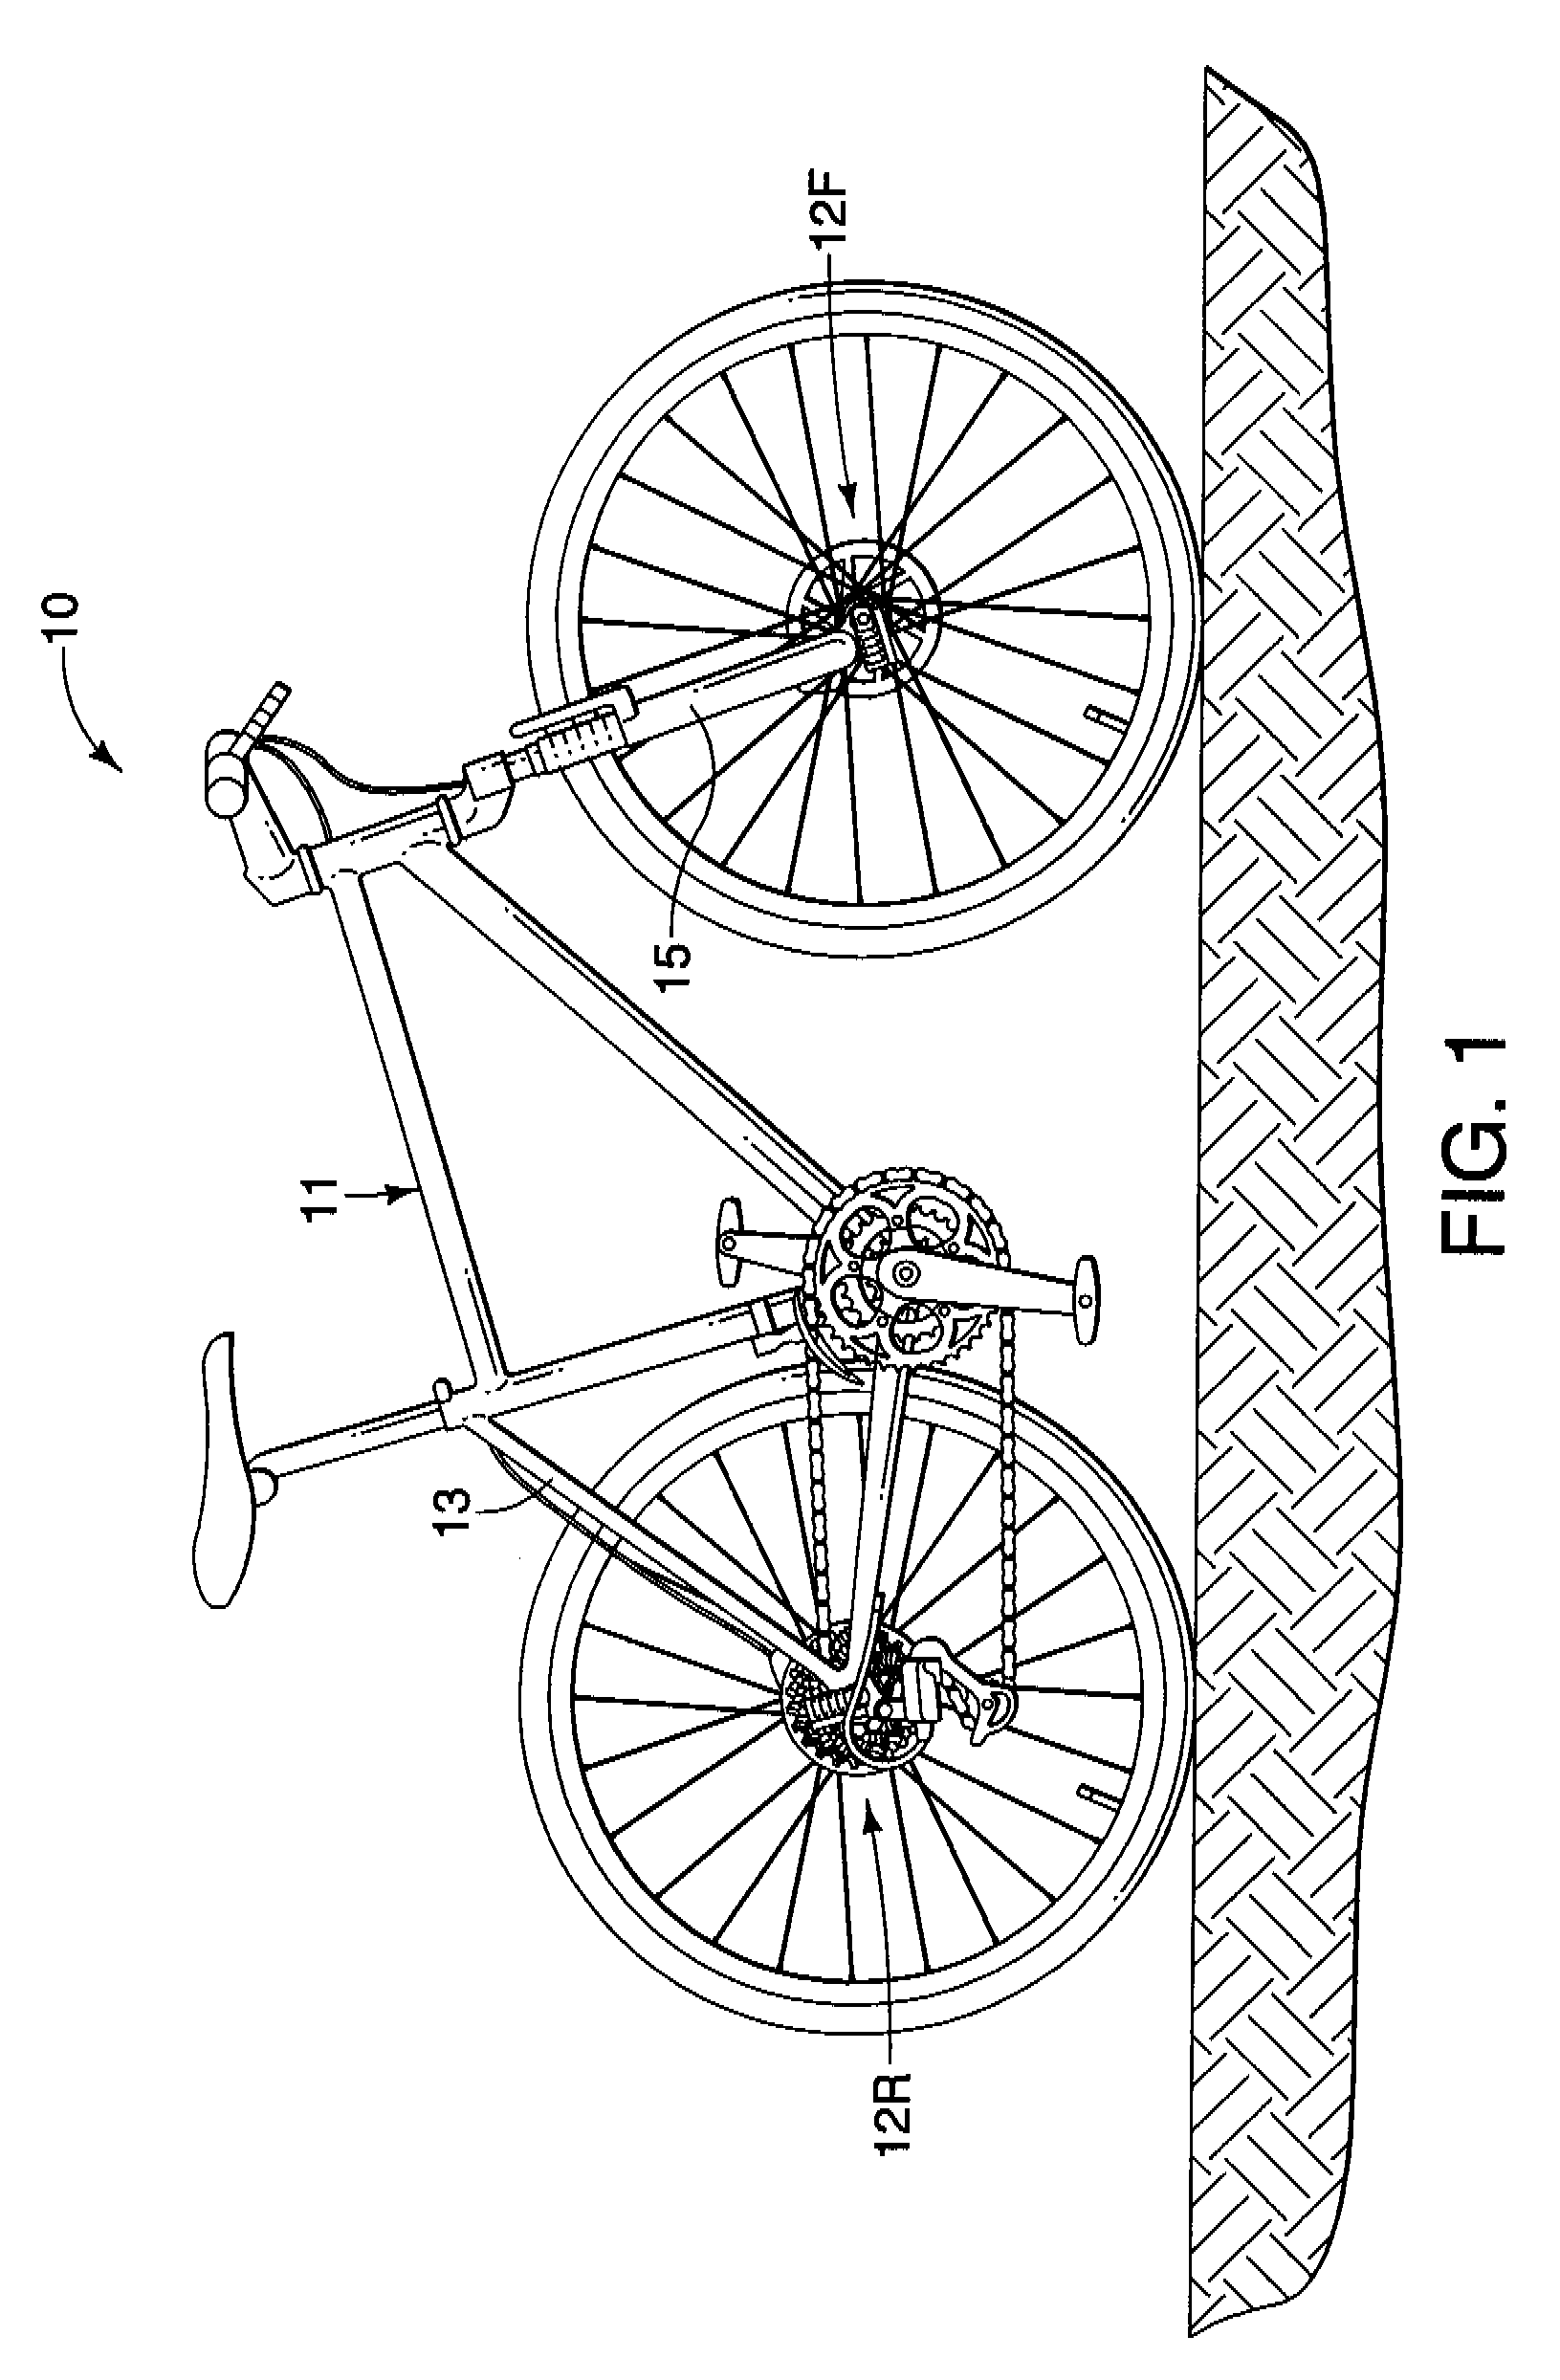 Bicycle quick release structure